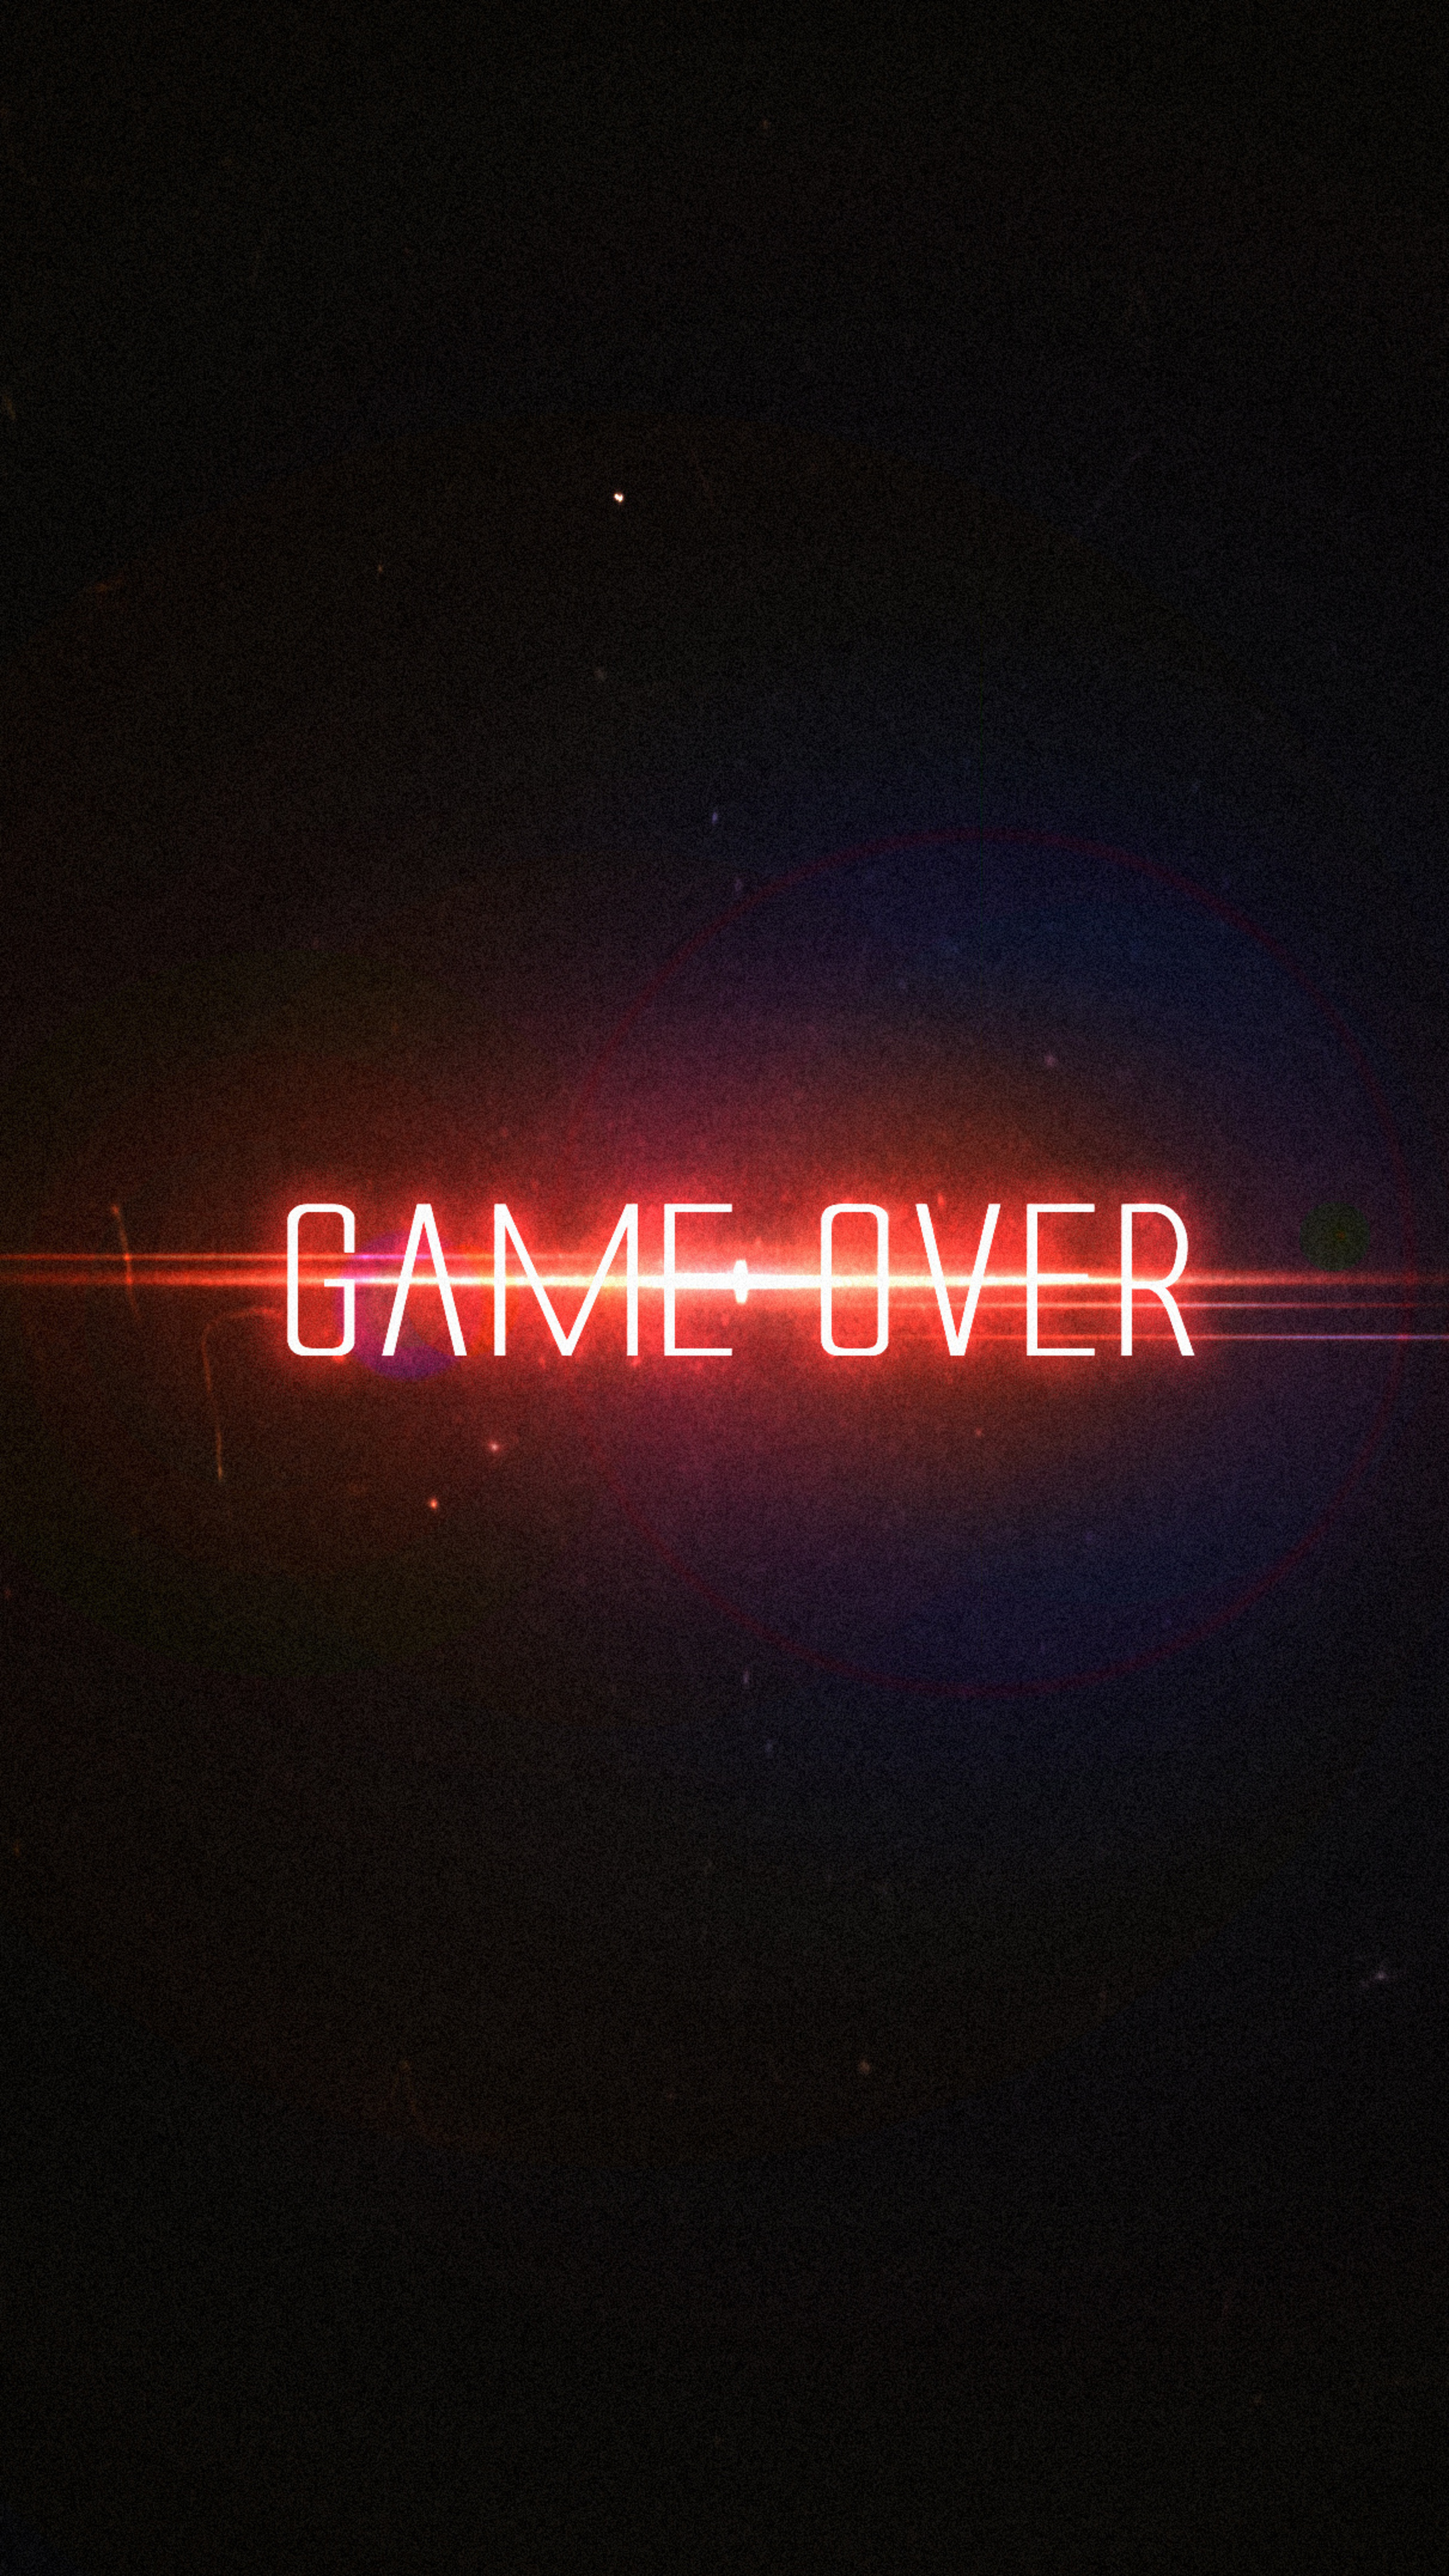 Game Over, Typographic design, 4K resolution, Sony Xperia, 2160x3840 4K Handy